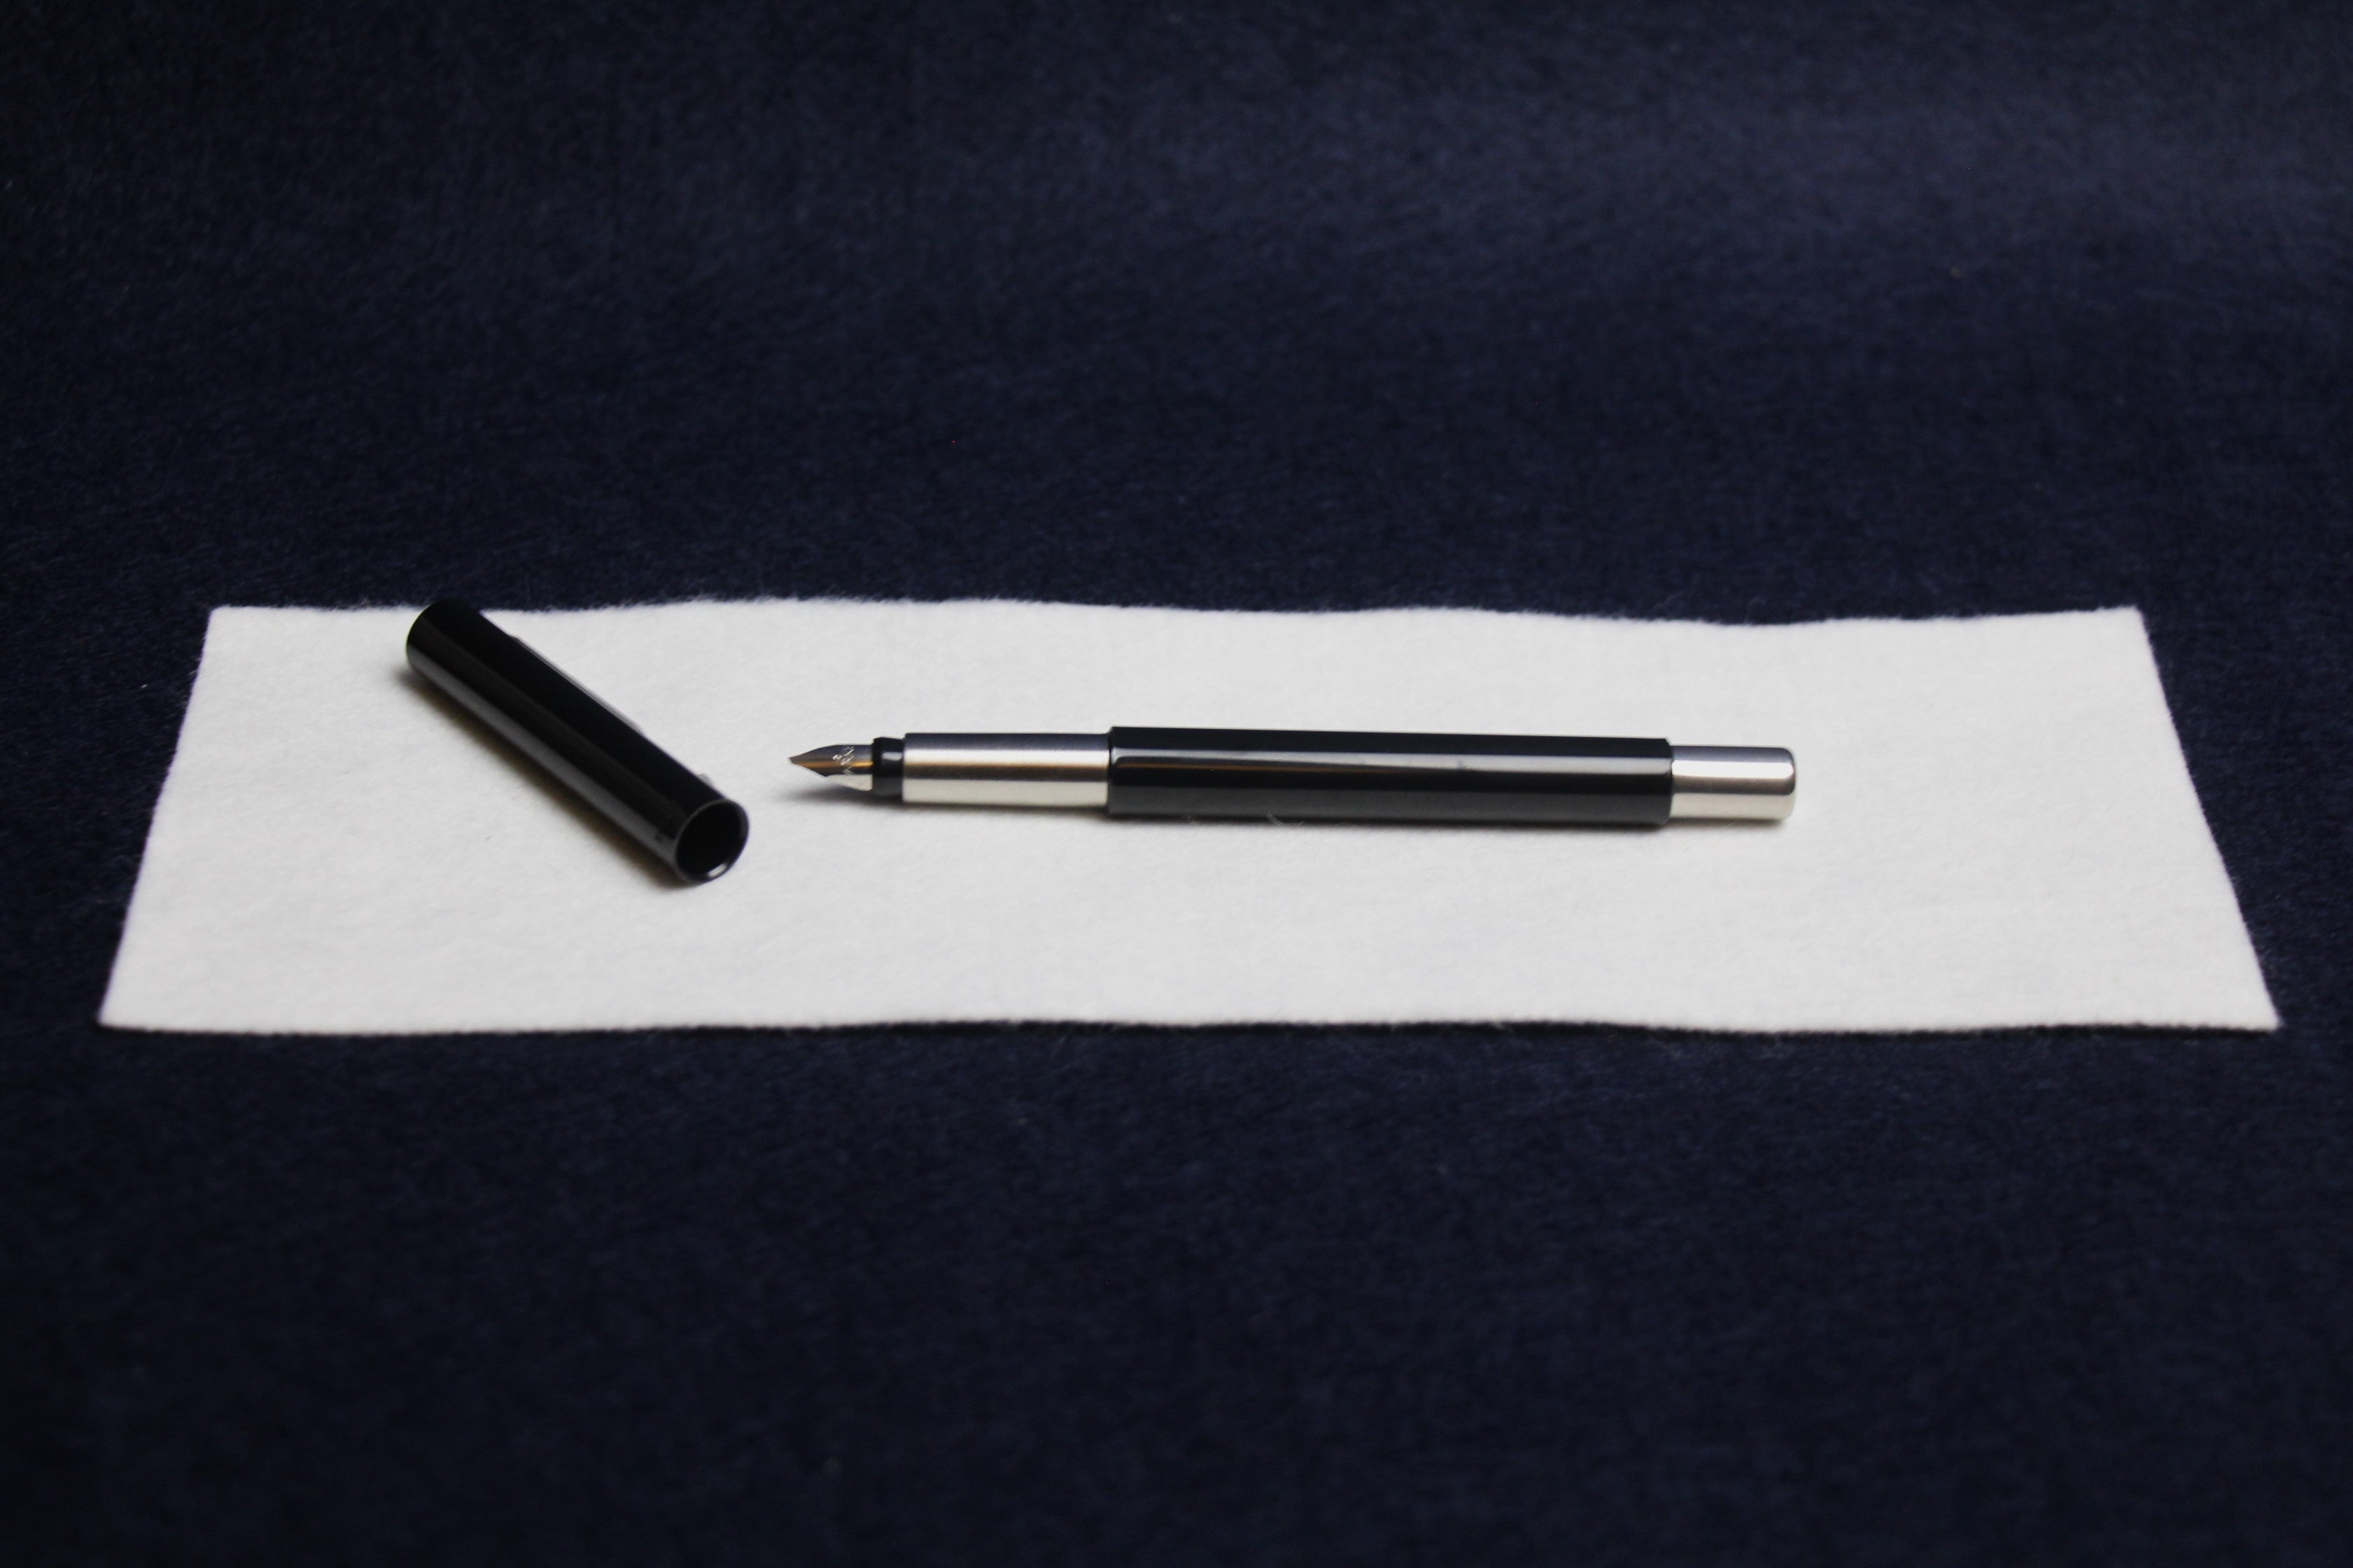 Parker Vector fountain qalam pen with left oblique nib for Arabic calligraphy